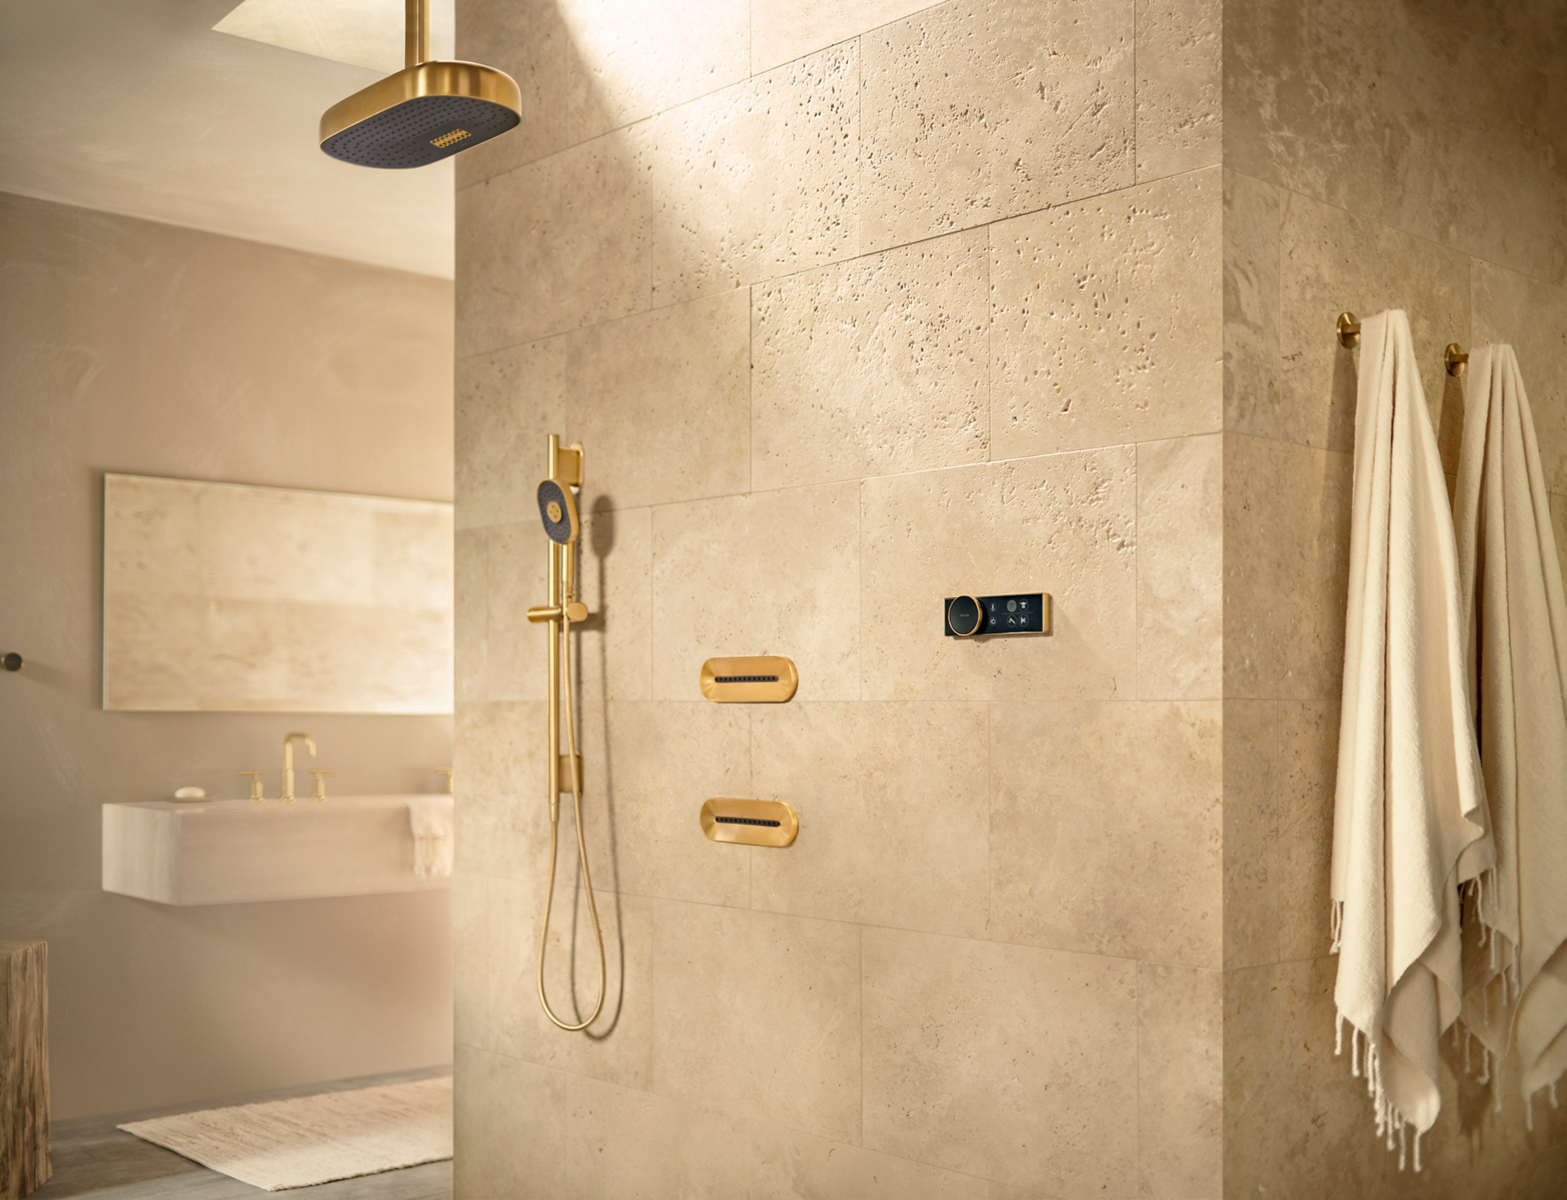 A shower with sand-colored walls, KOHLER Statement rainhead, handshower, and oval body sprays, and an Anthem digital controller.